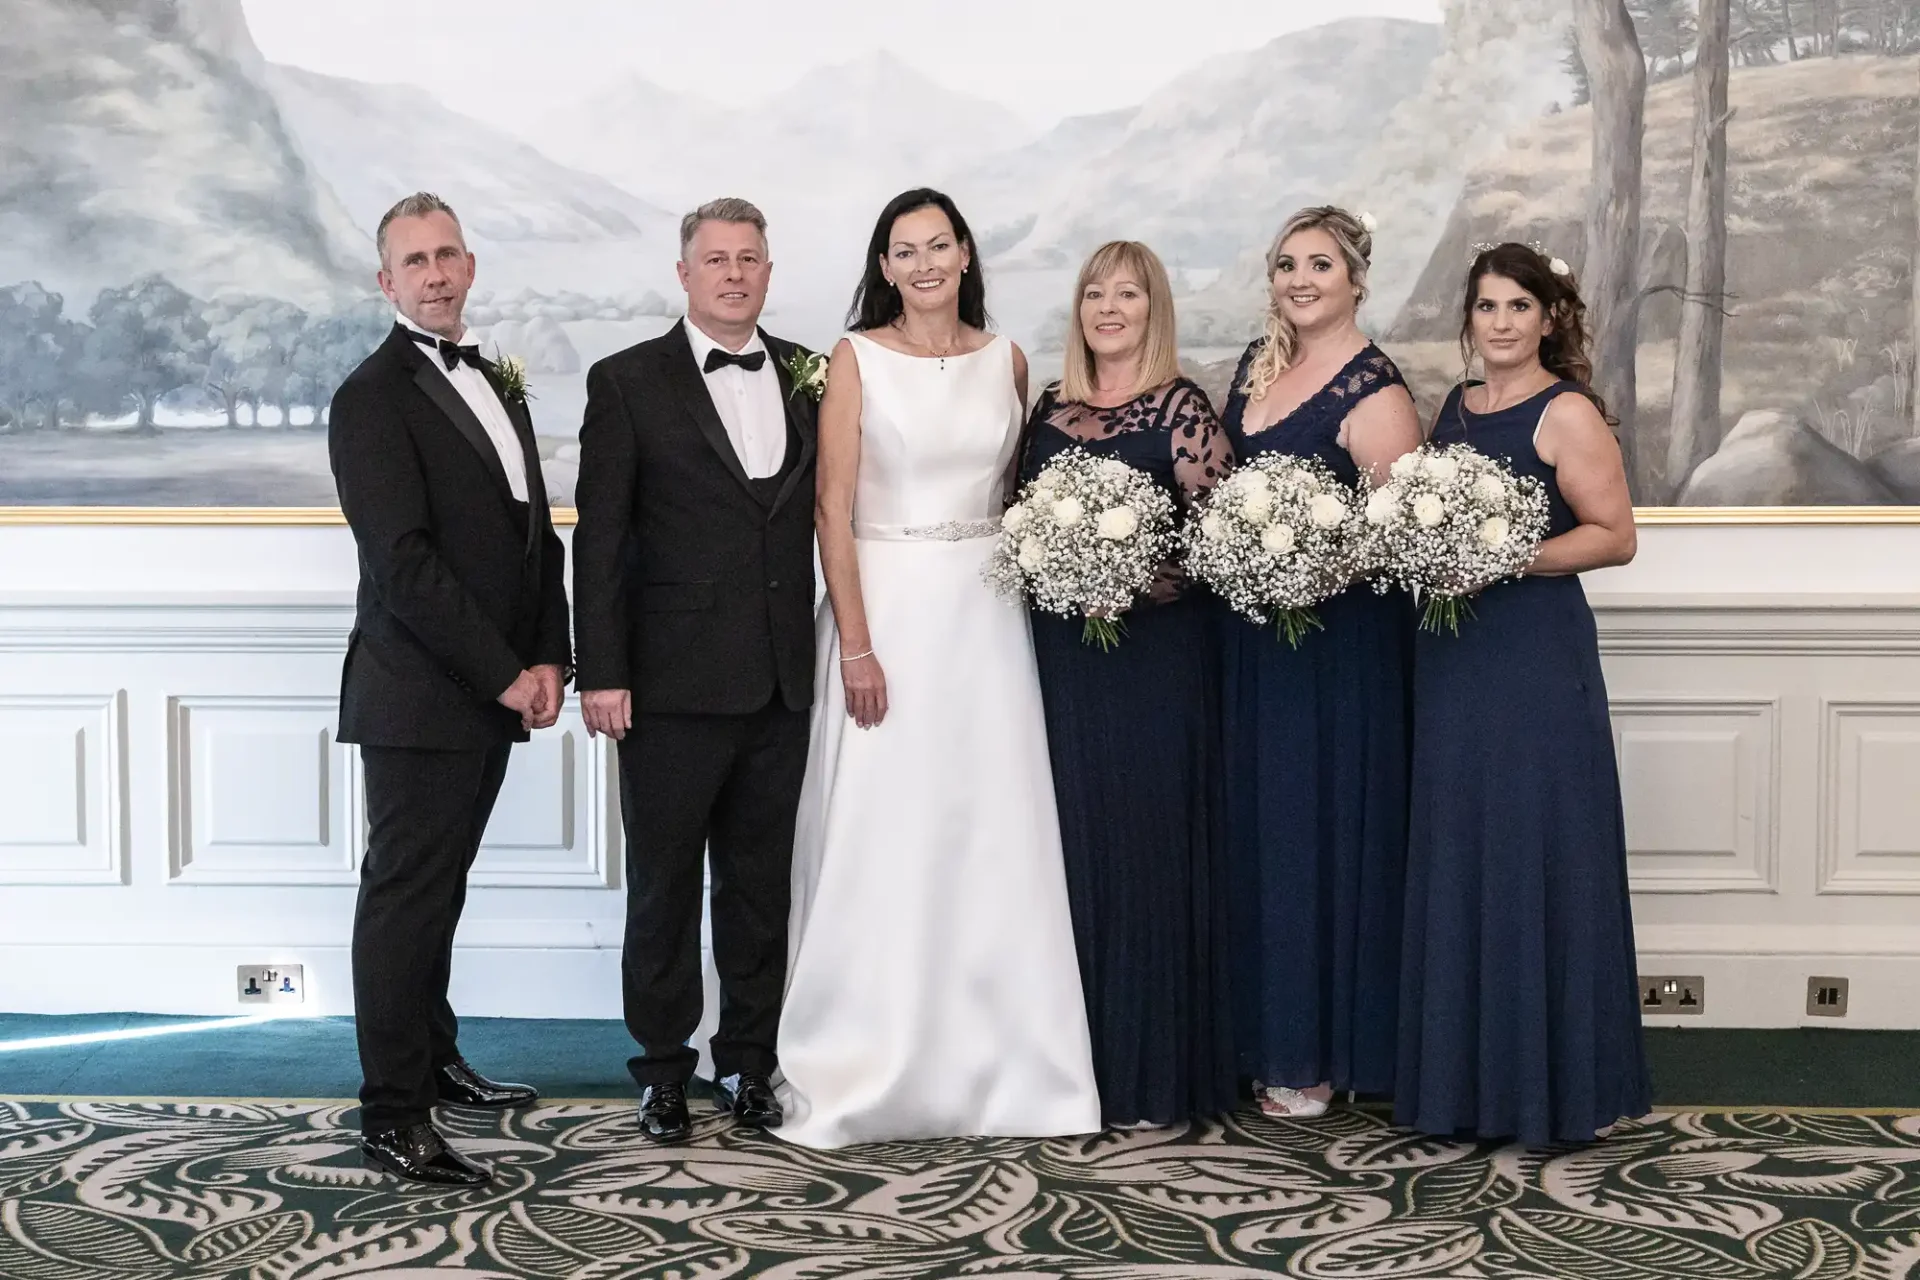 Wedding group photo featuring a bride and groom centered among three guests, two women in navy dresses and one man in a suit, all holding bouquets, in an elegant room.